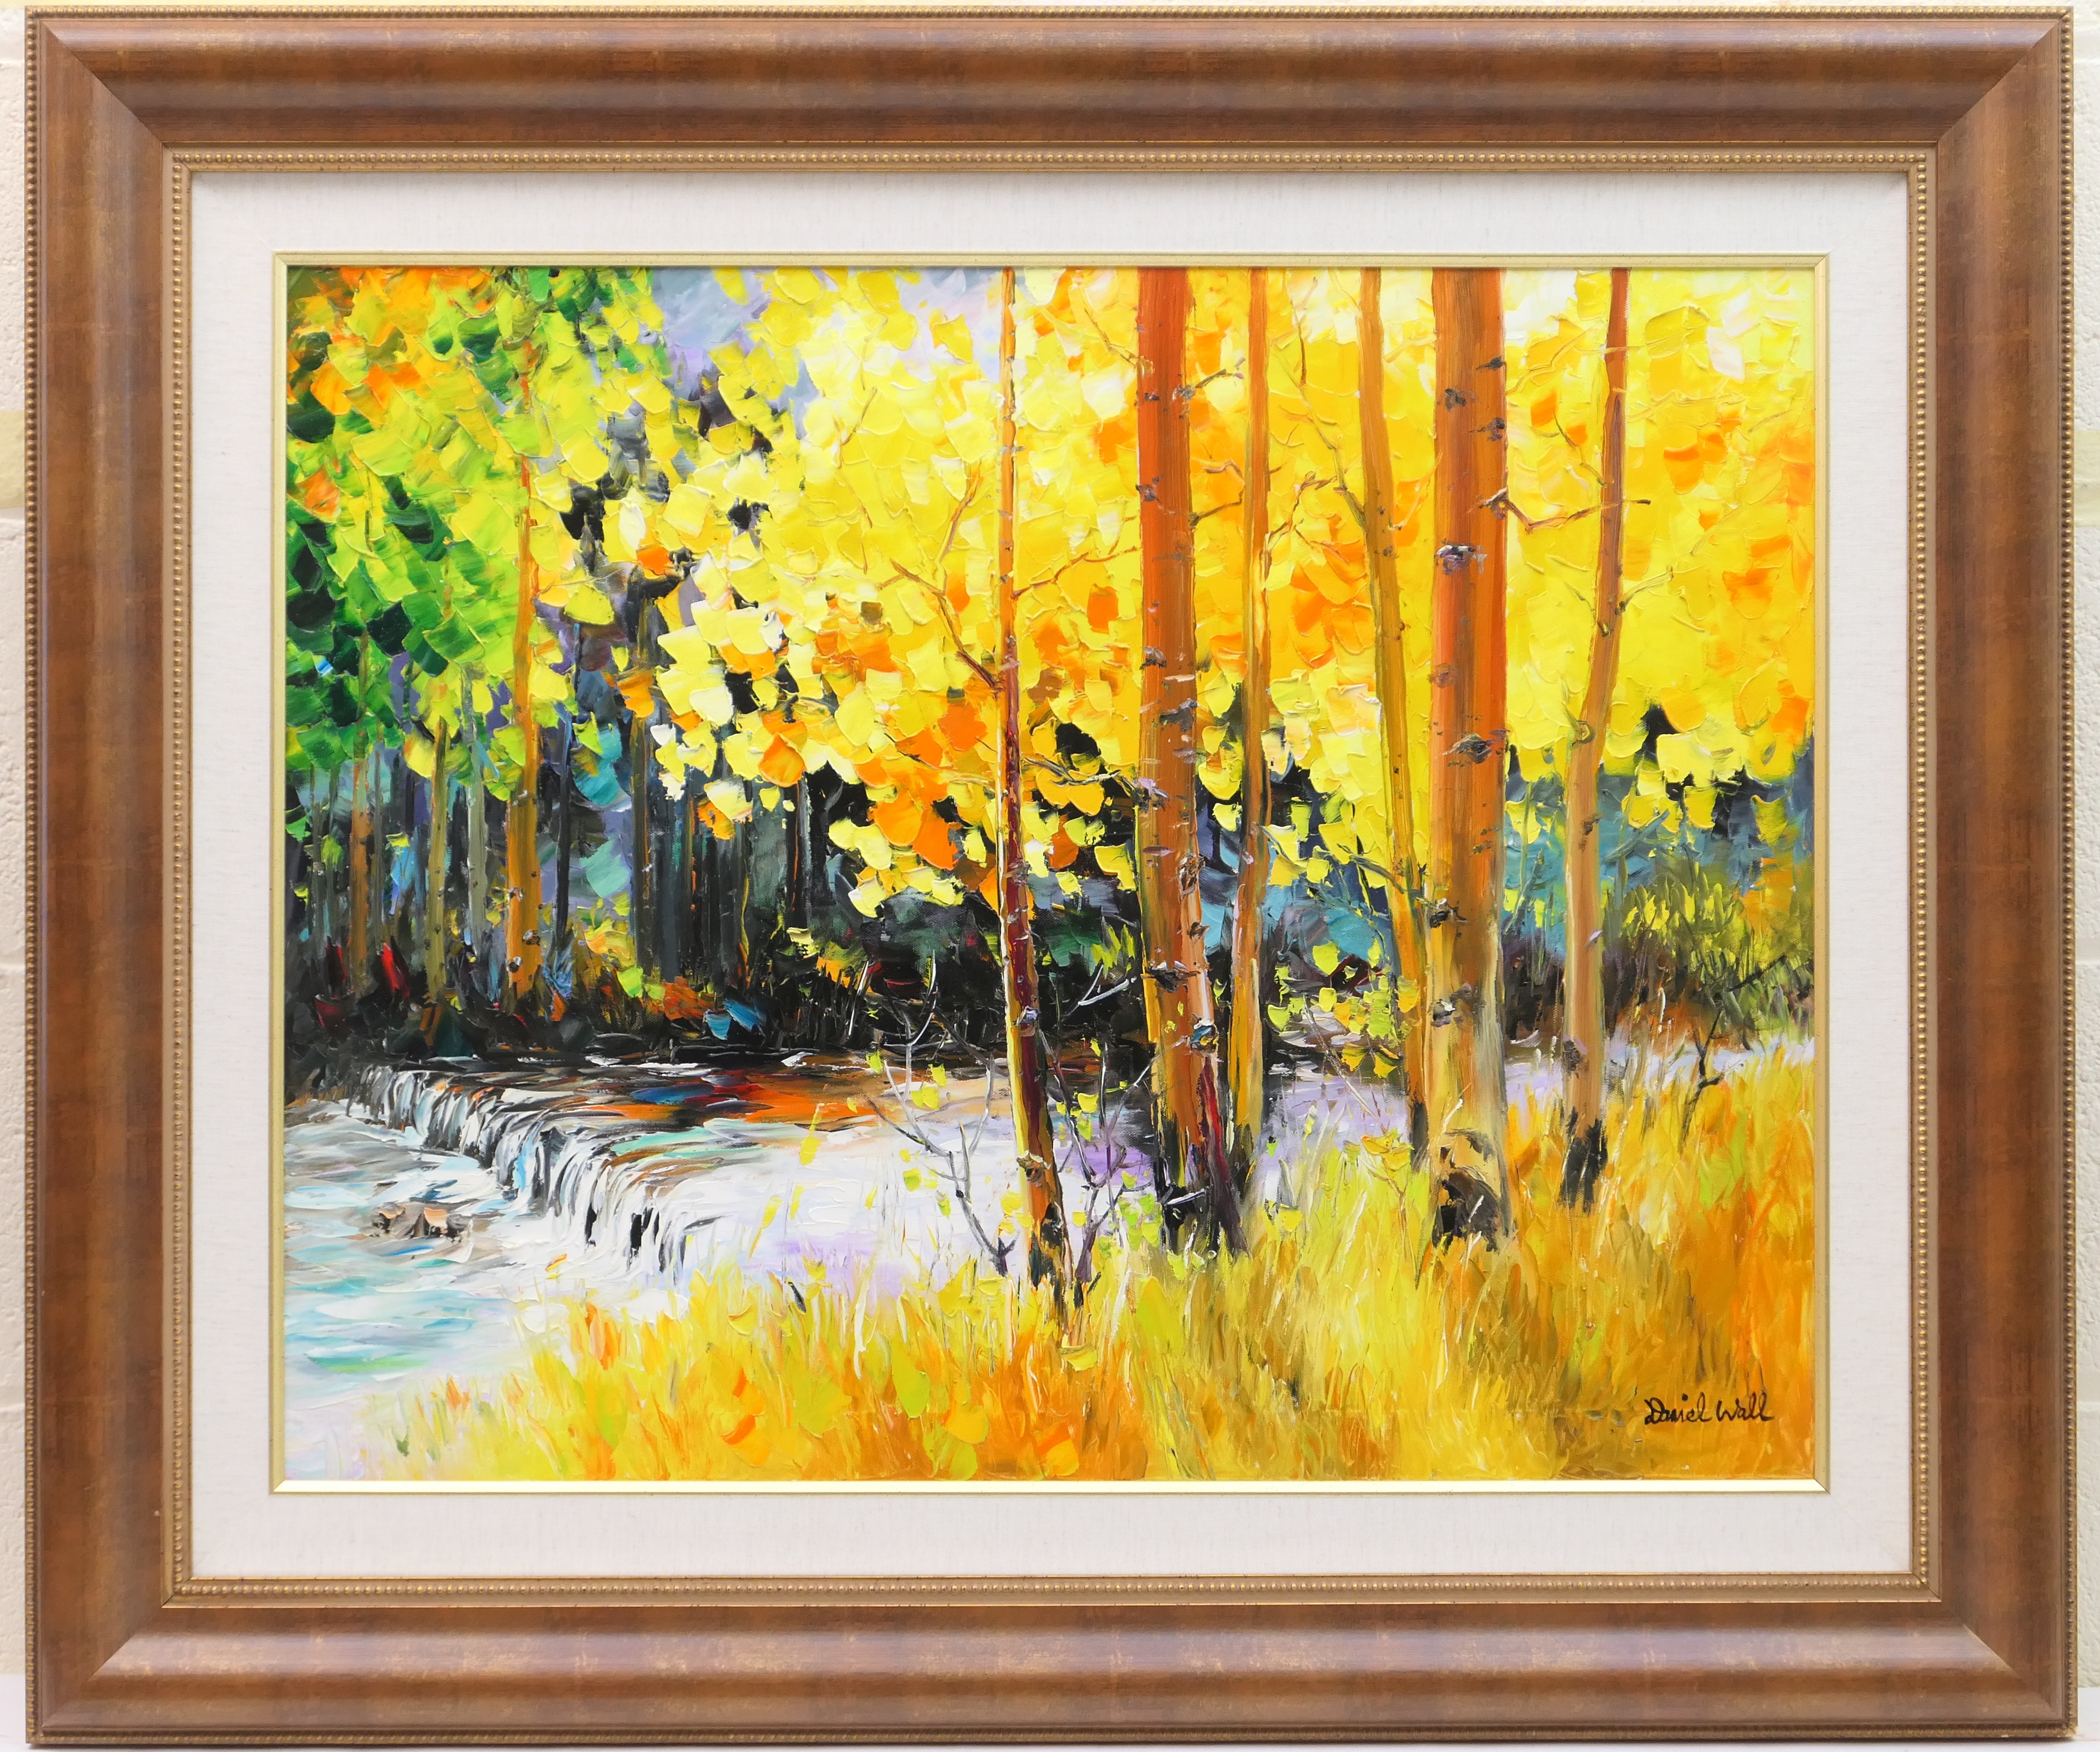 Daniel Wall (American, Contemporary), Birch Forest, signed oil on canvas, 60cm x 76cm